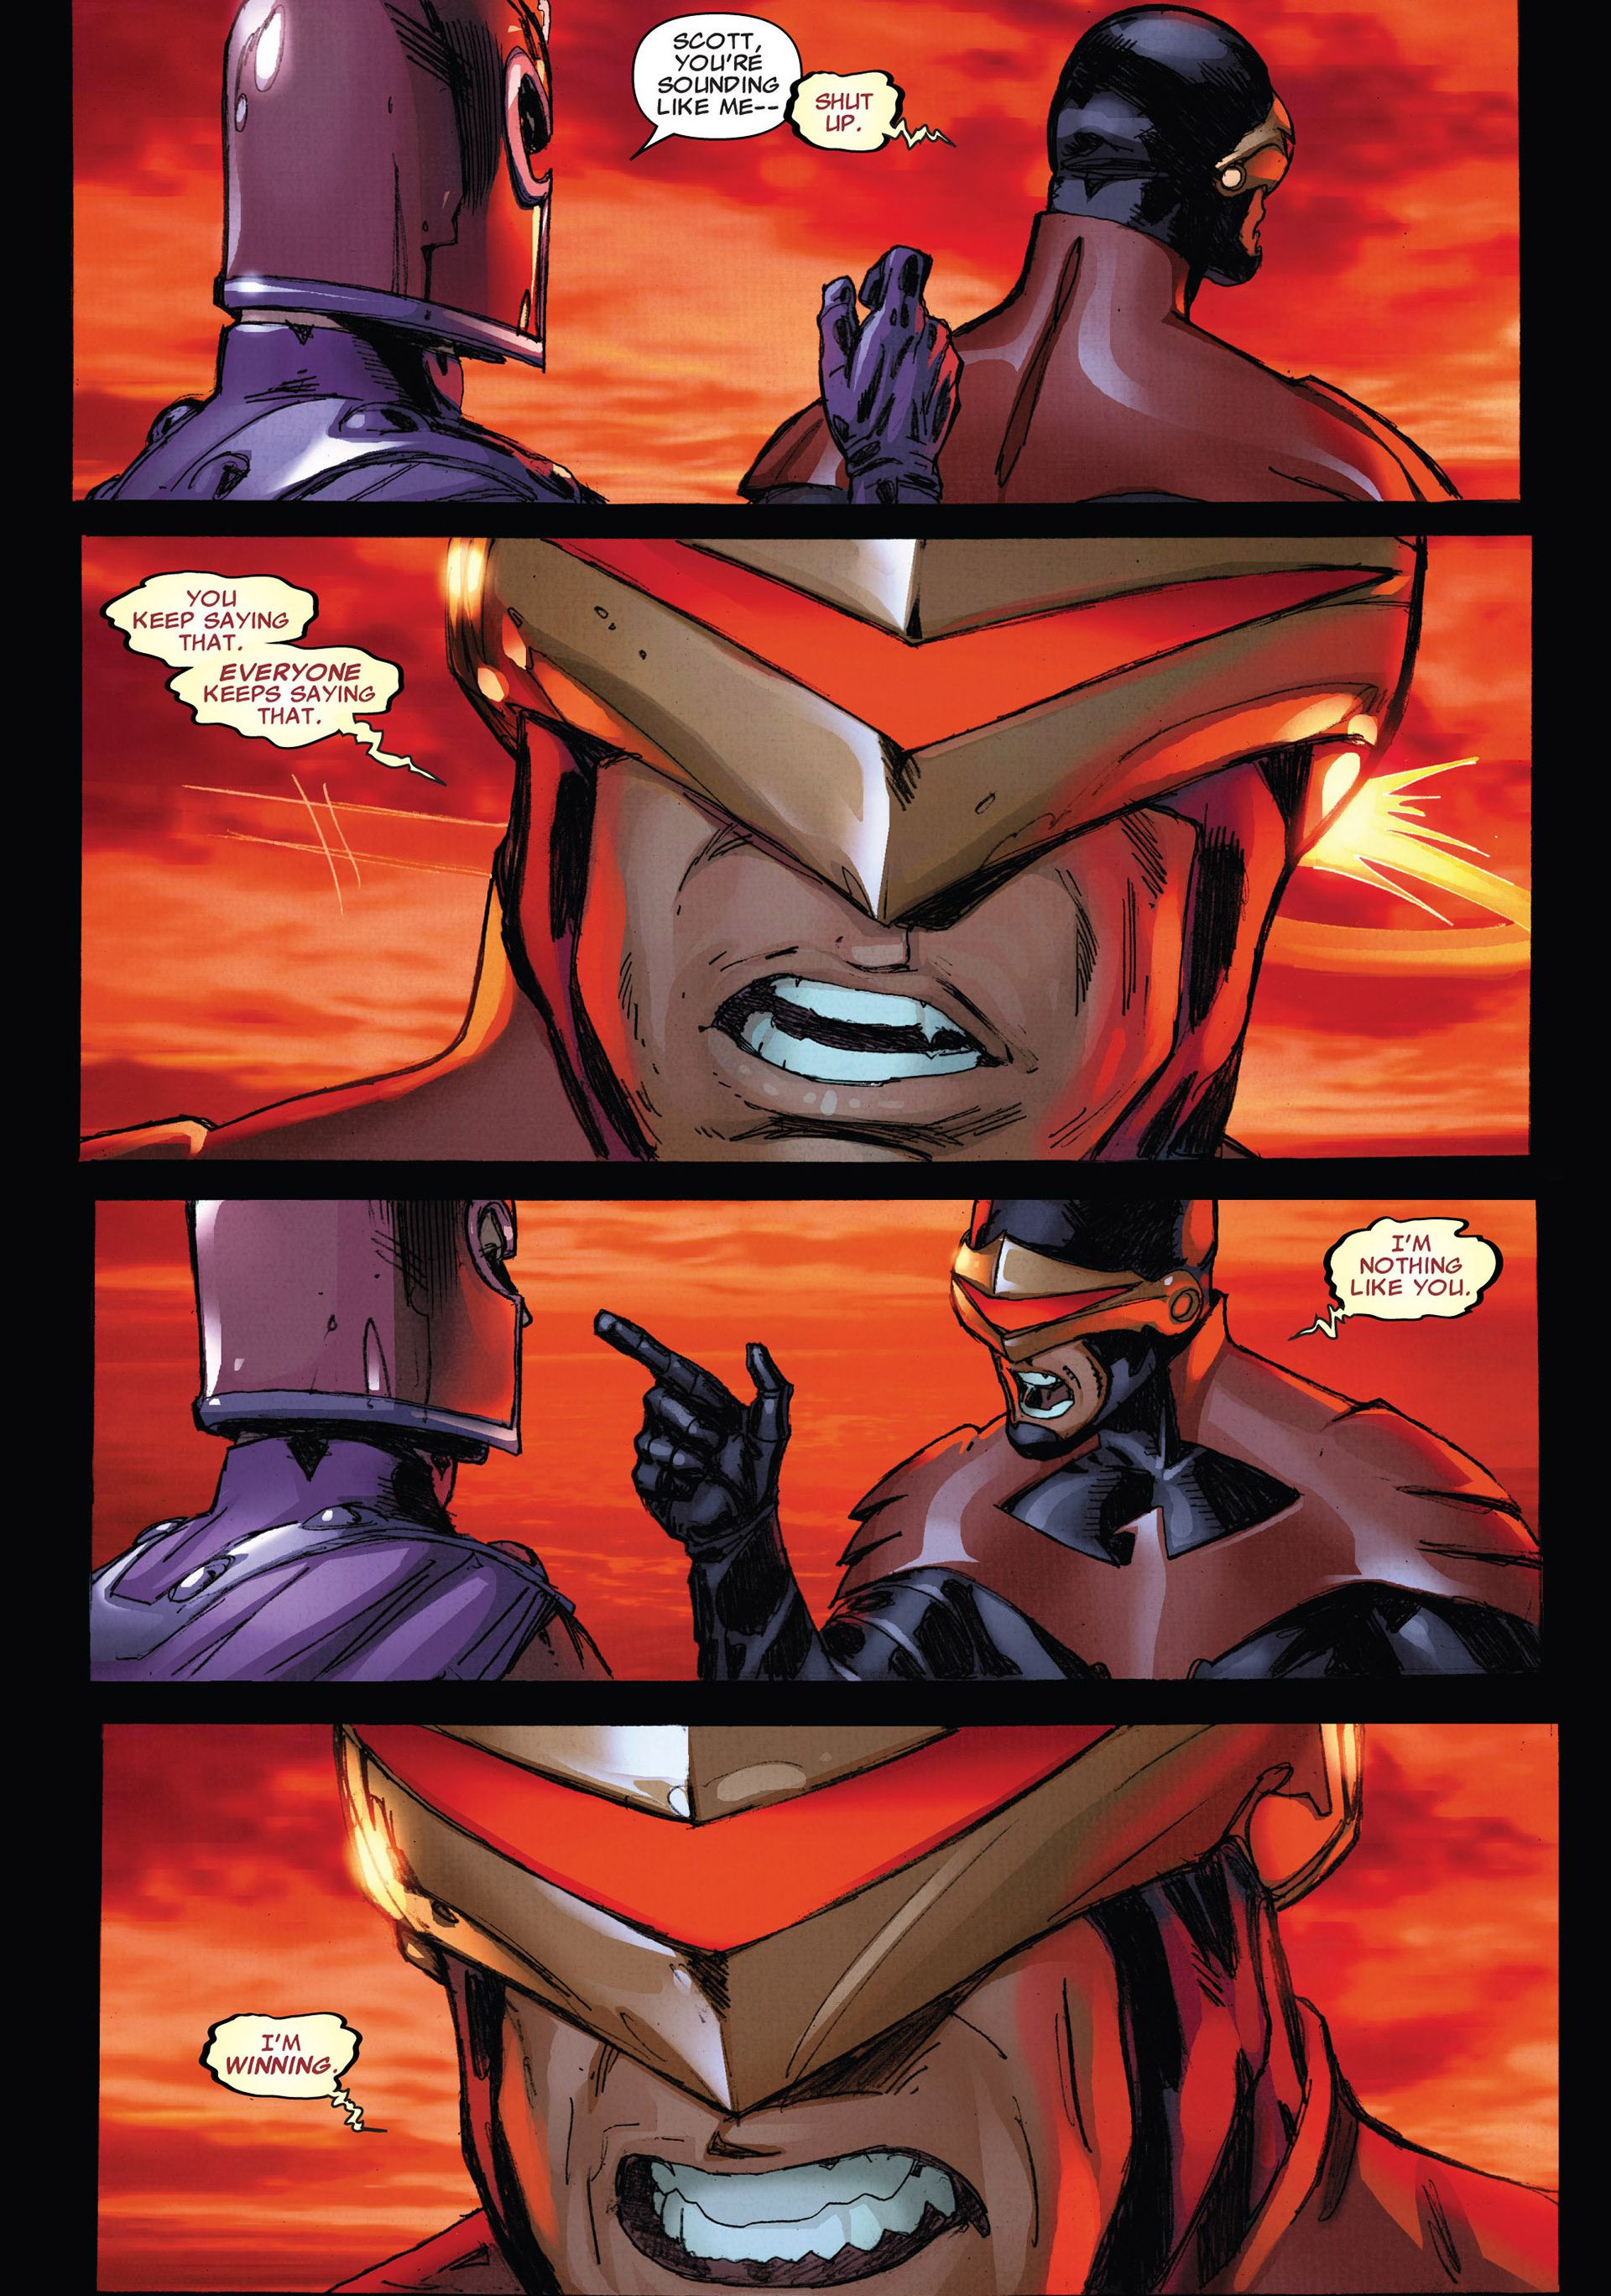 Cyclops, while wielding the Phoenix Force, tells Magneto he's nothing like him. 